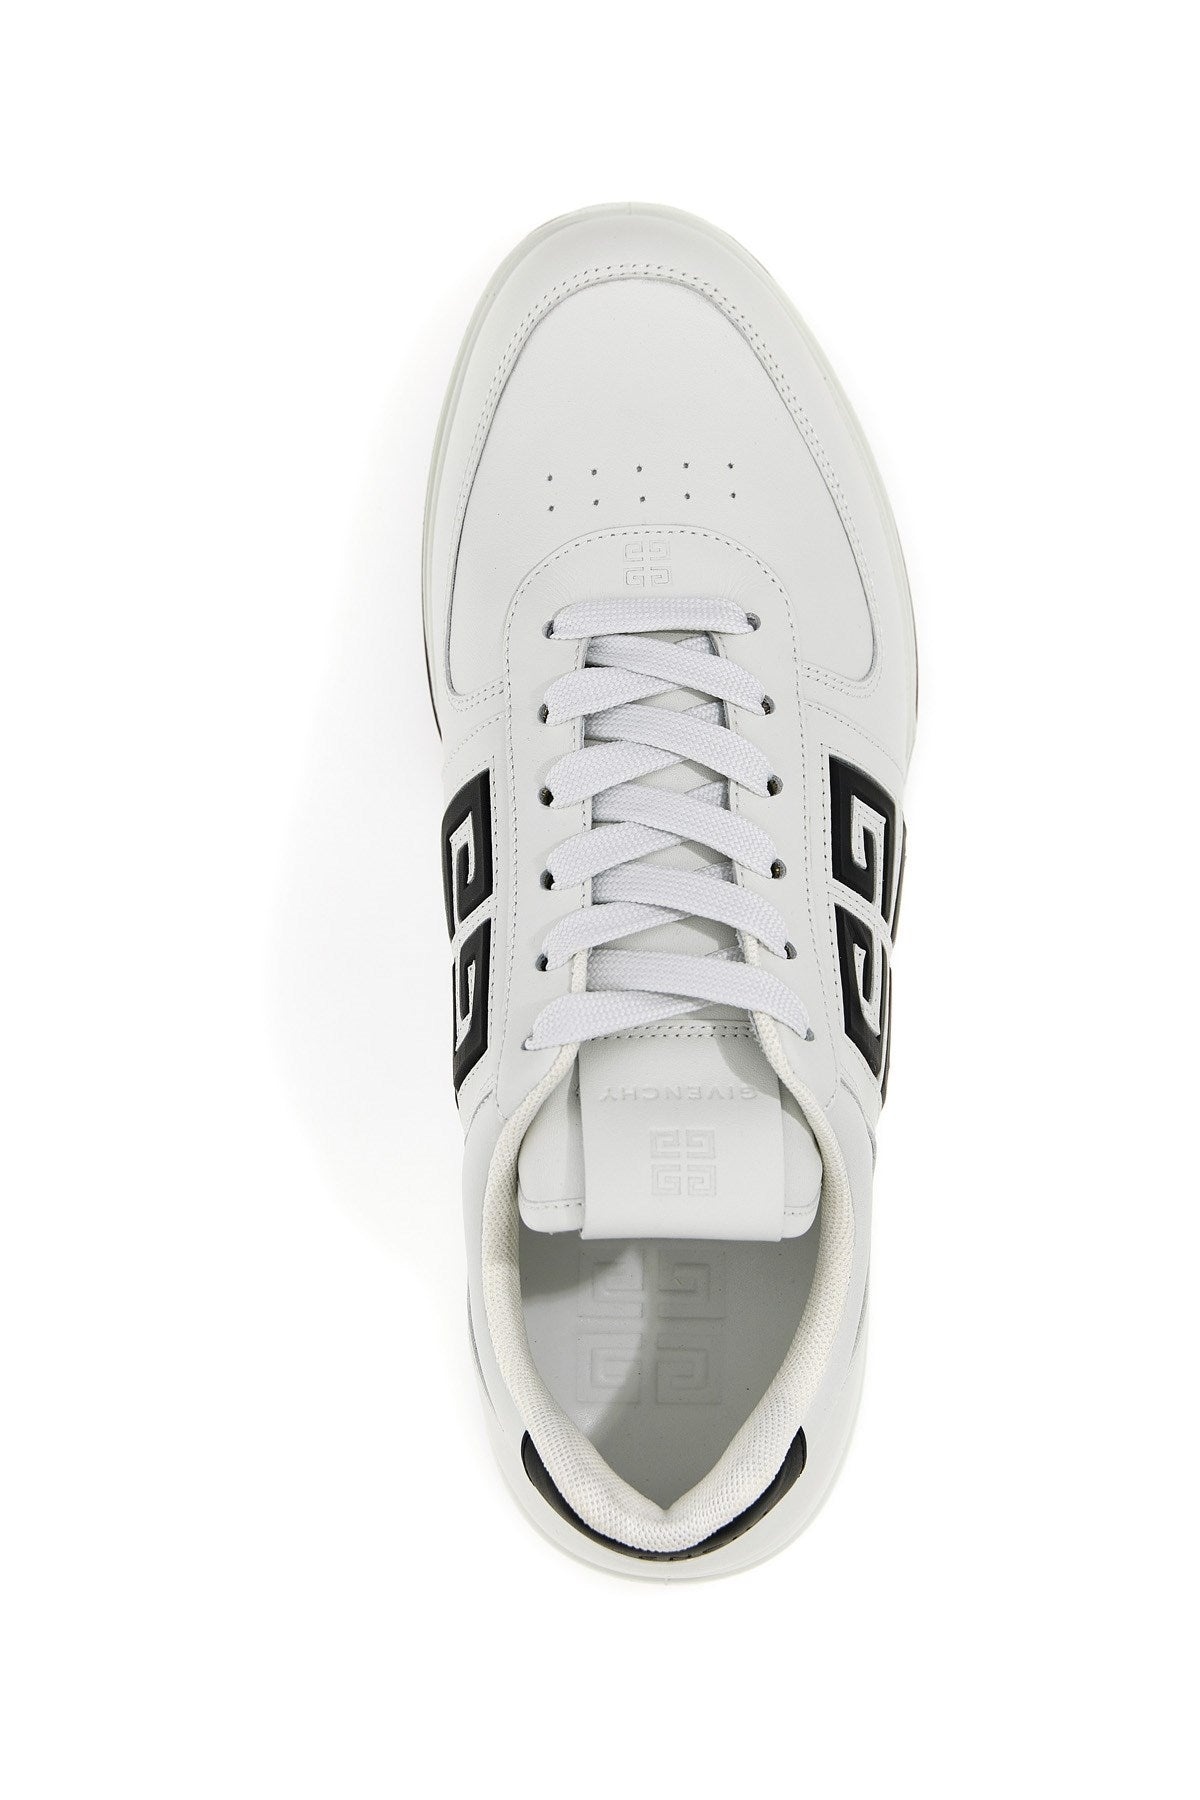 Givenchy Men 'G4' Sneakers - 2